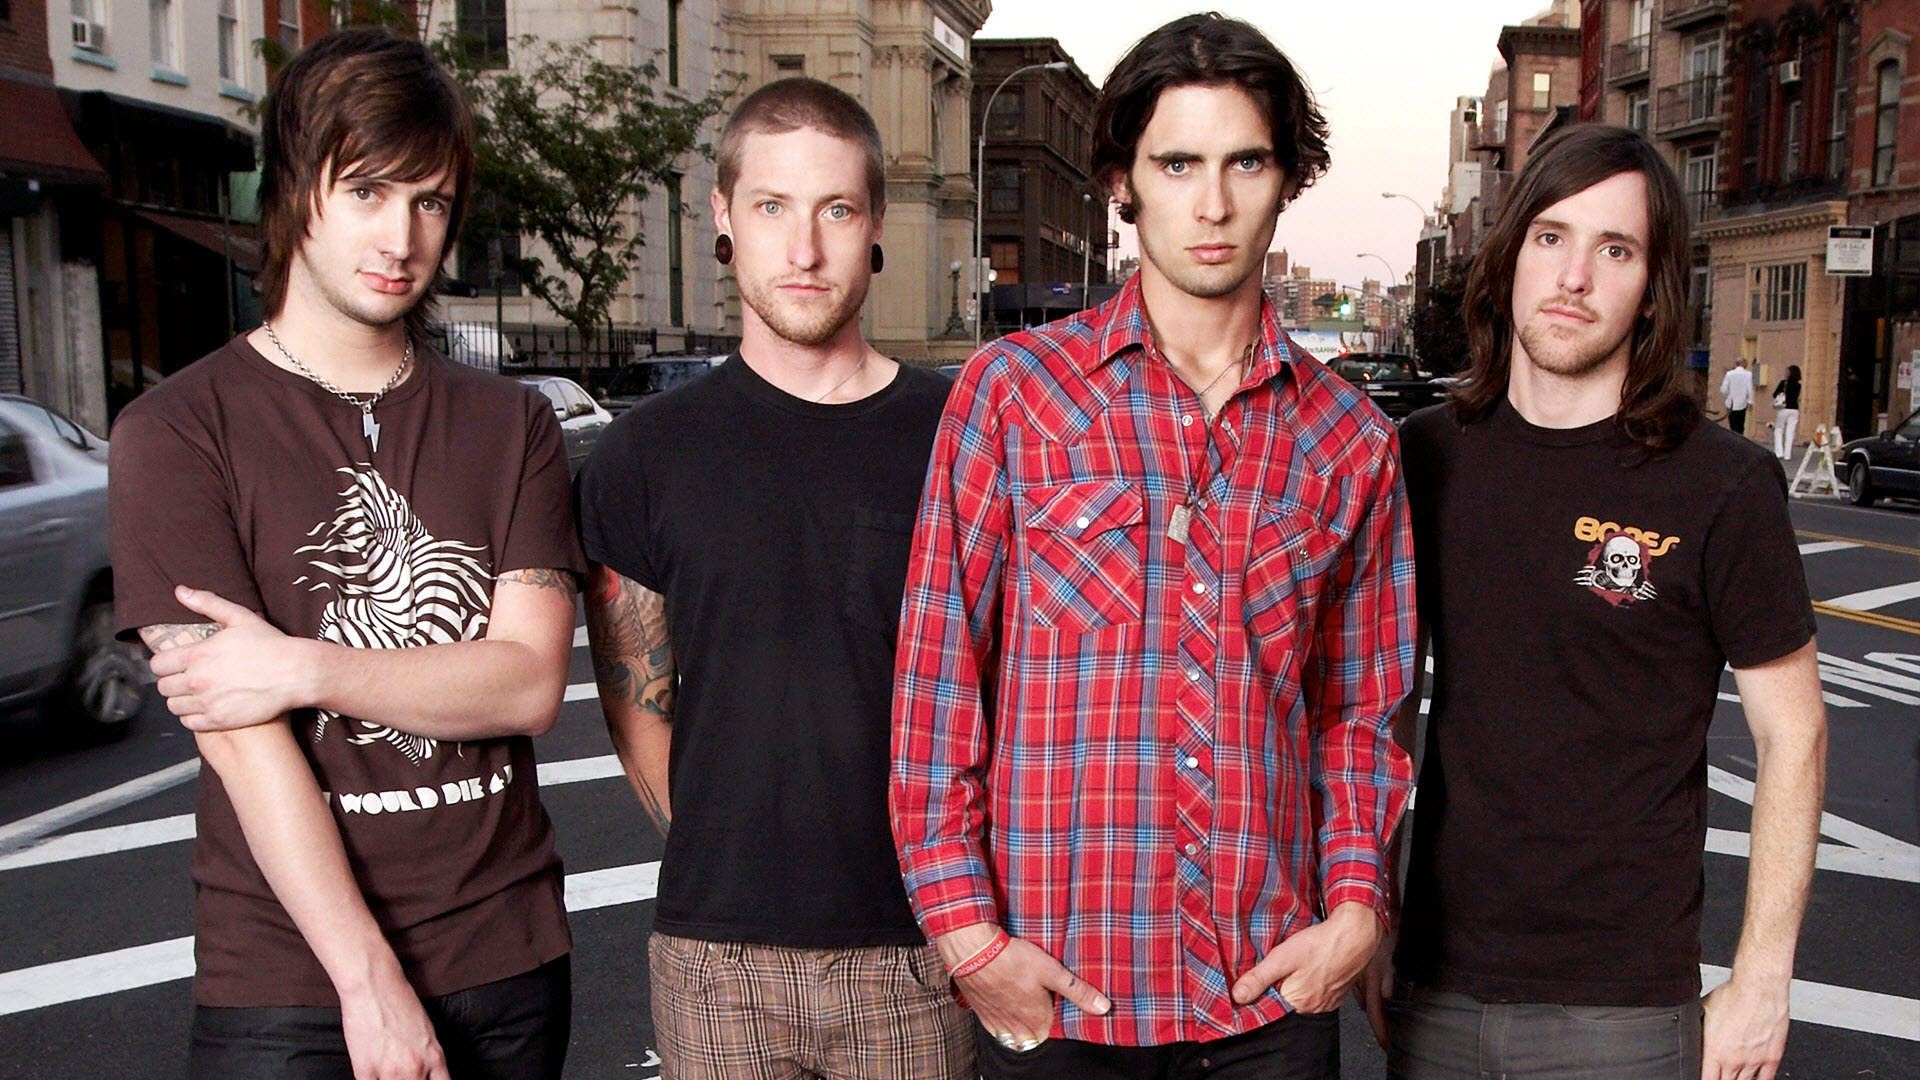 Gives You Hell av The All American Rejects